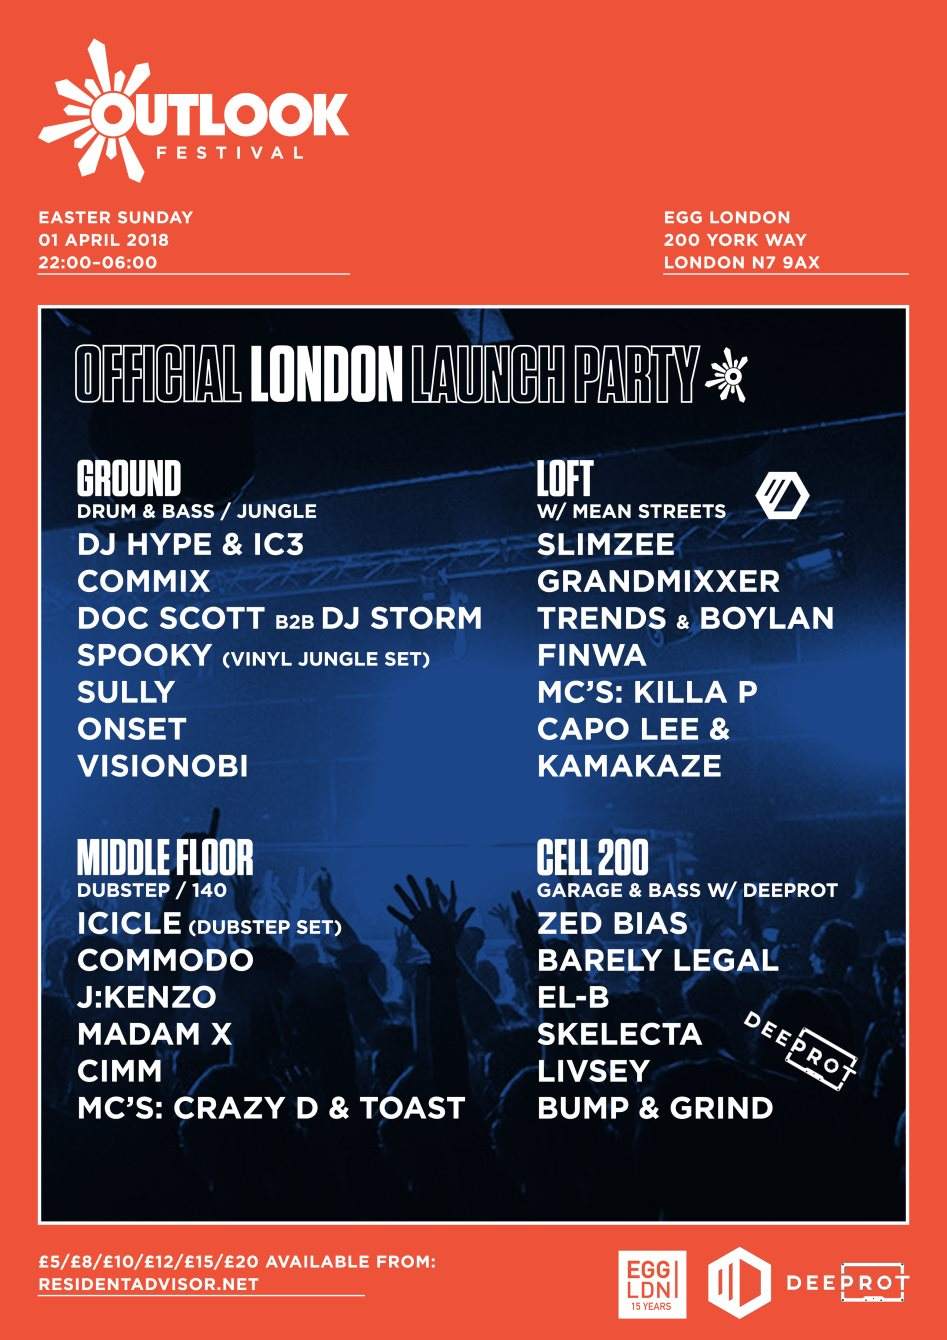 Outlook Festival 2018 London Launch Party - Página frontal